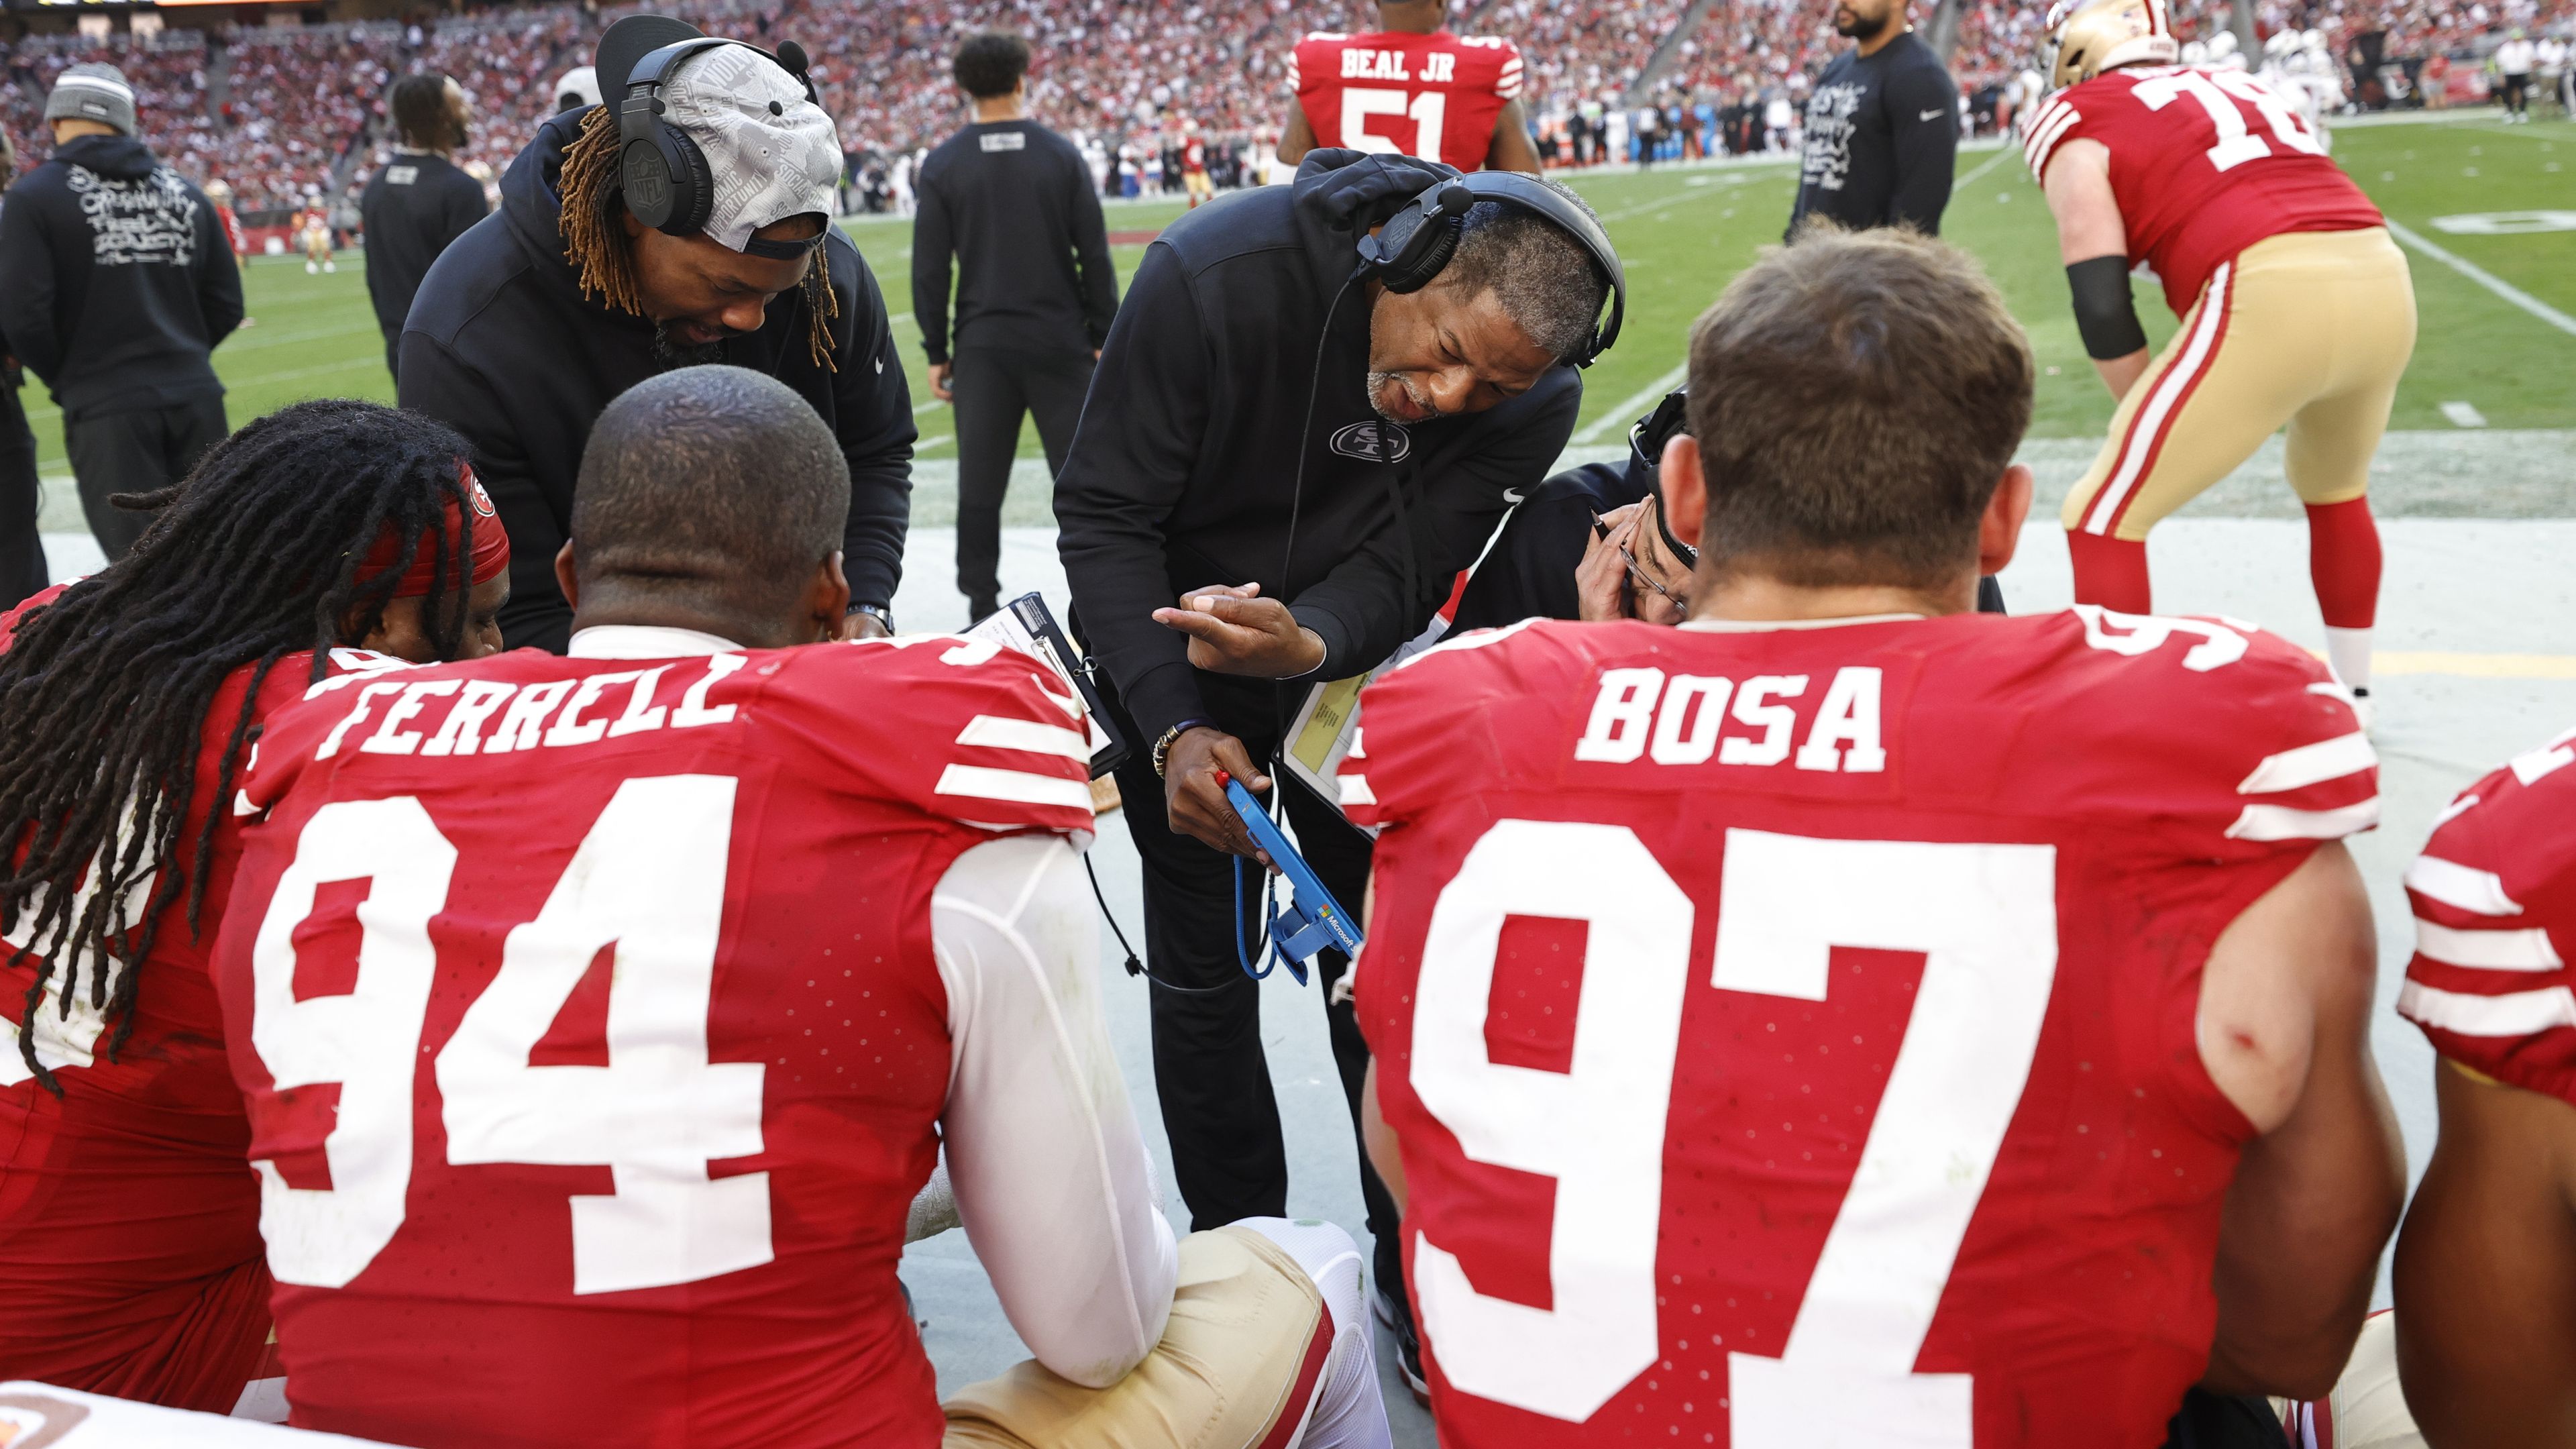 'Something that I have to do': San Francisco 49ers brutally axe defensive coach after Super Bowl loss